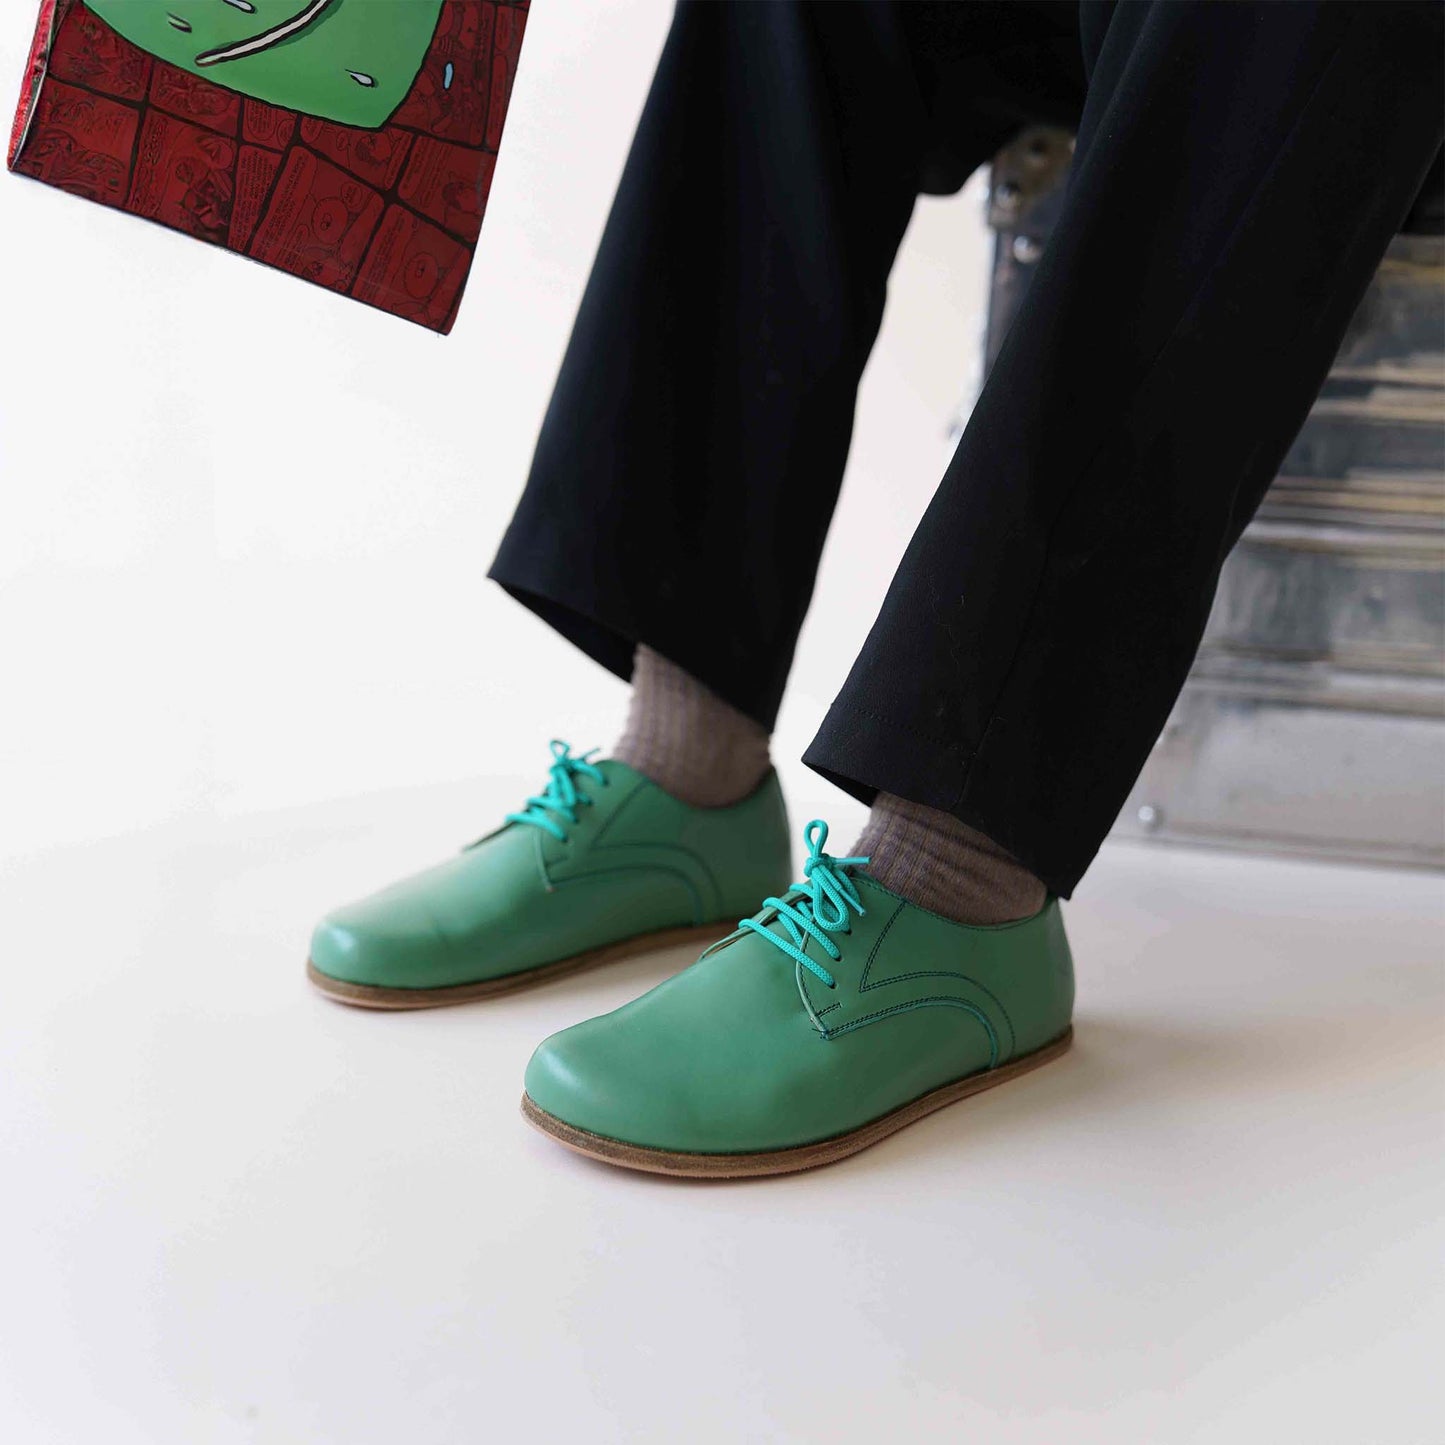 Elegant Locris Leather Barefoot Men's Oxfords in green, perfect for a stylish and comfortable everyday wear.